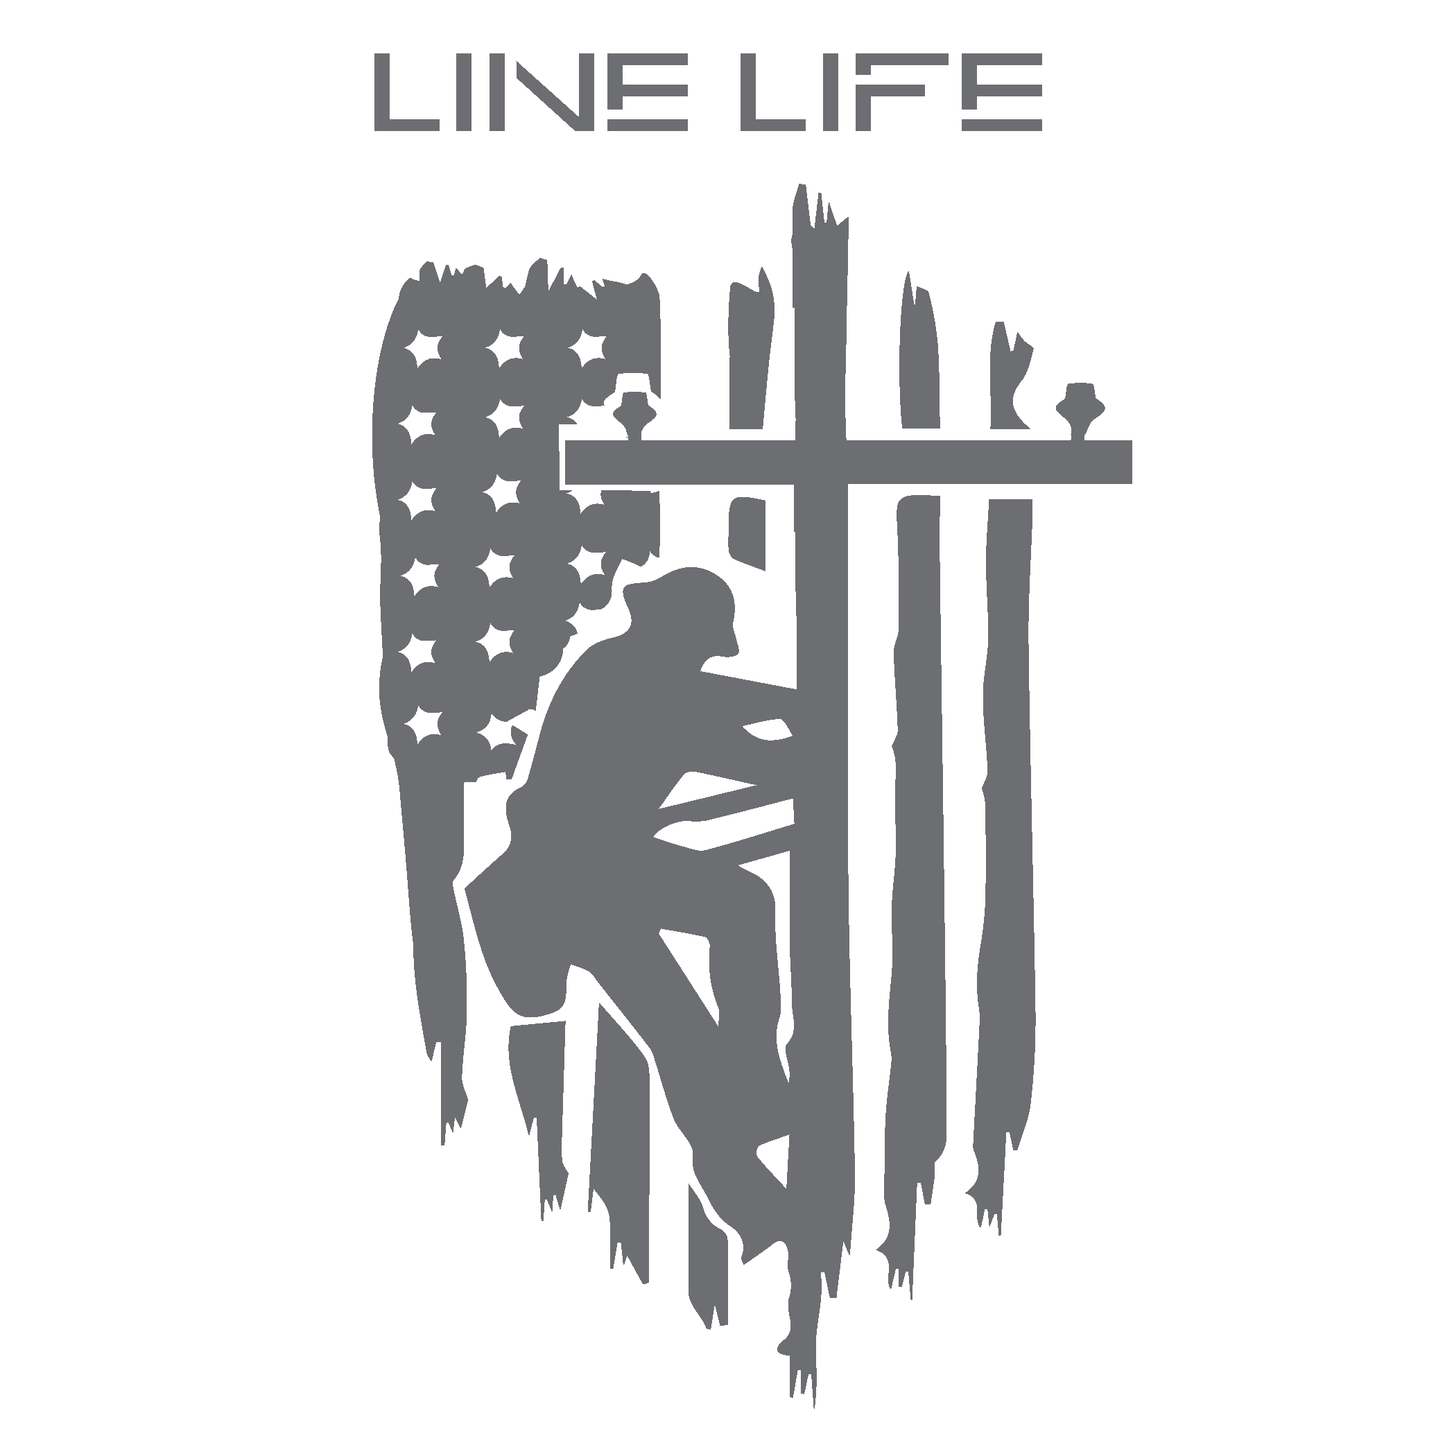 ShopVinylDesignStore.com Lineman, USA Distressed Flag and Line Life for Corn Hole Boards Wide Style 06 Shop Vinyl Design decals stickers